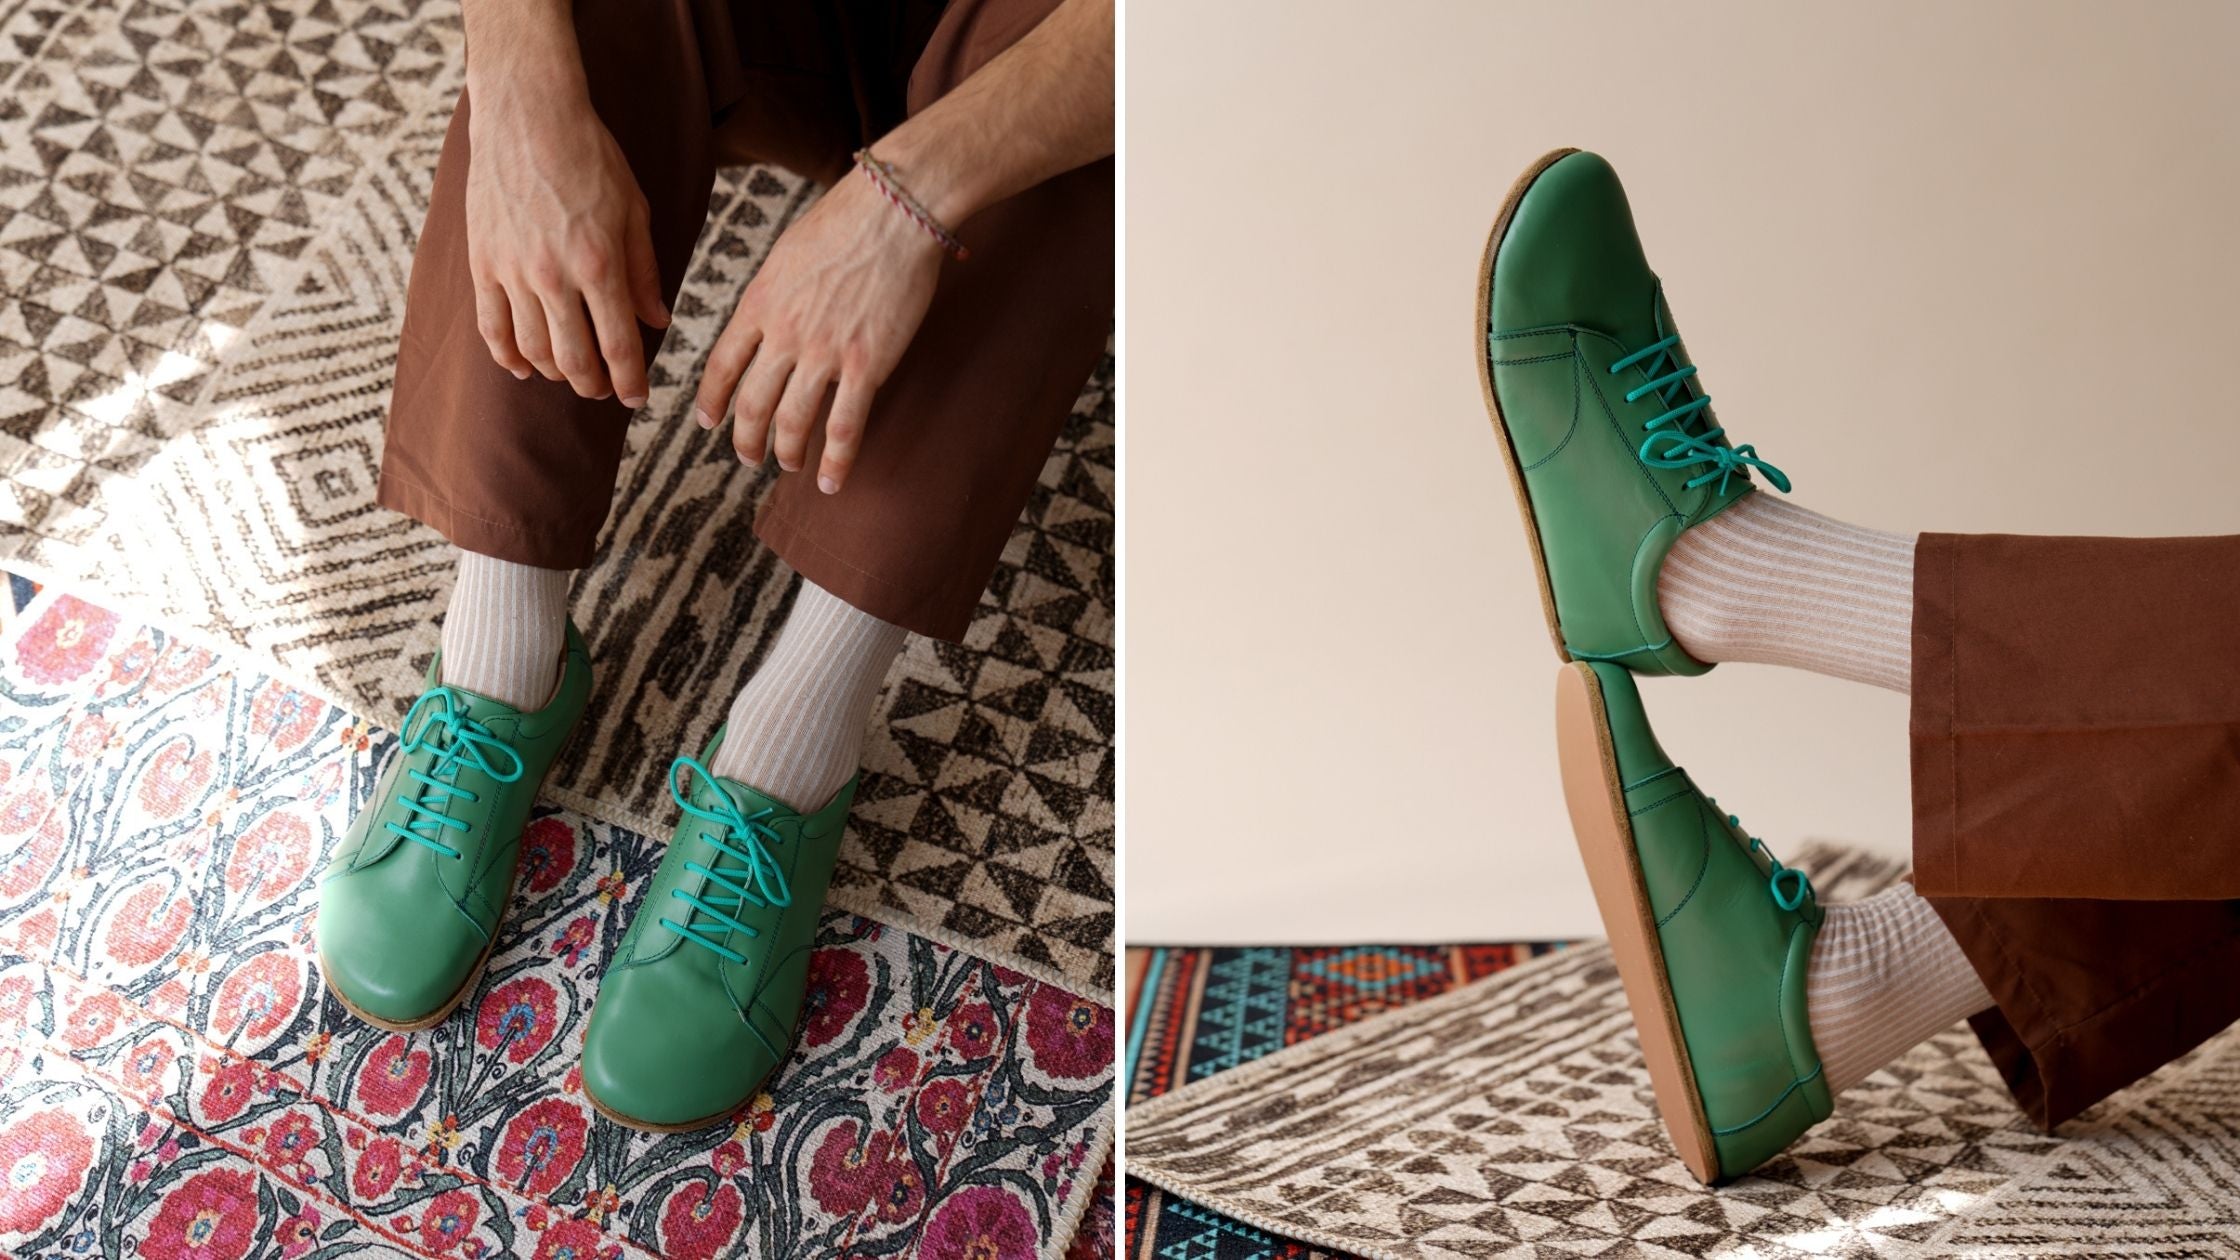 Man wearing green barefoot sneakers on a colorful patterned rug. These zero-drop sneakers are crafted from premium leather with a minimalist design, flexible sole, and wide toe box, promoting natural walking and foot health. Discover unmatched comfort at pelanir.com!